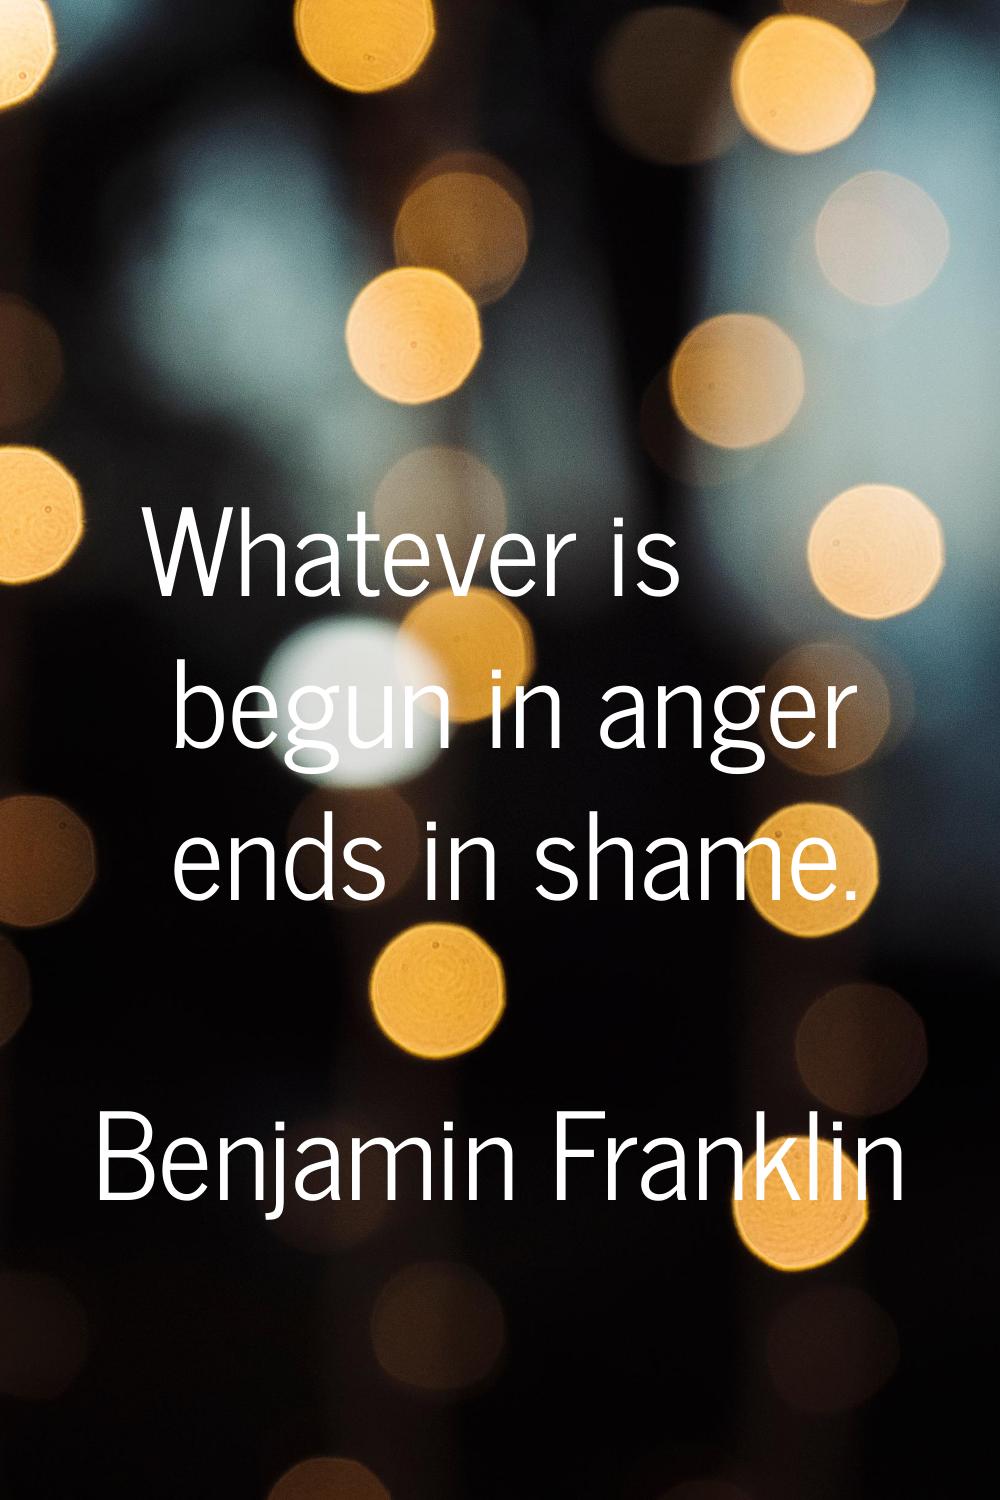 Whatever is begun in anger ends in shame.